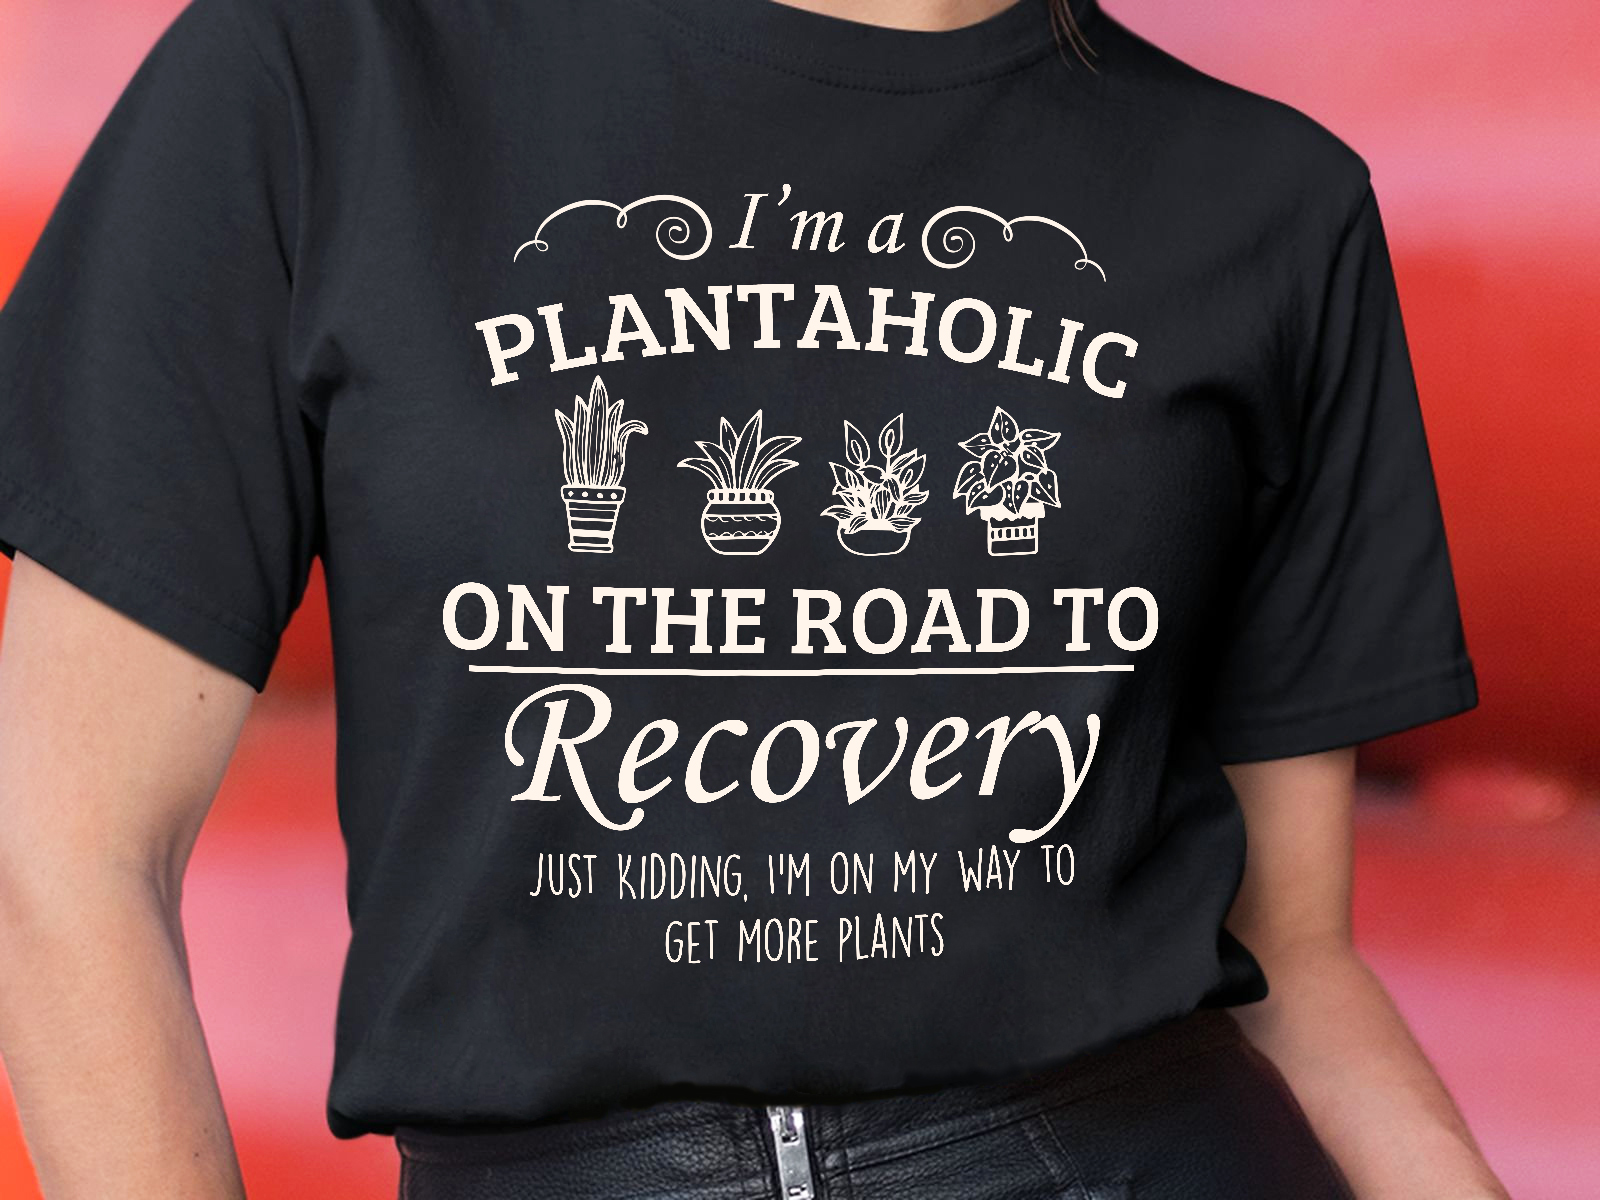 I'm a plantaholic on the road to recovery, my way to get more plants